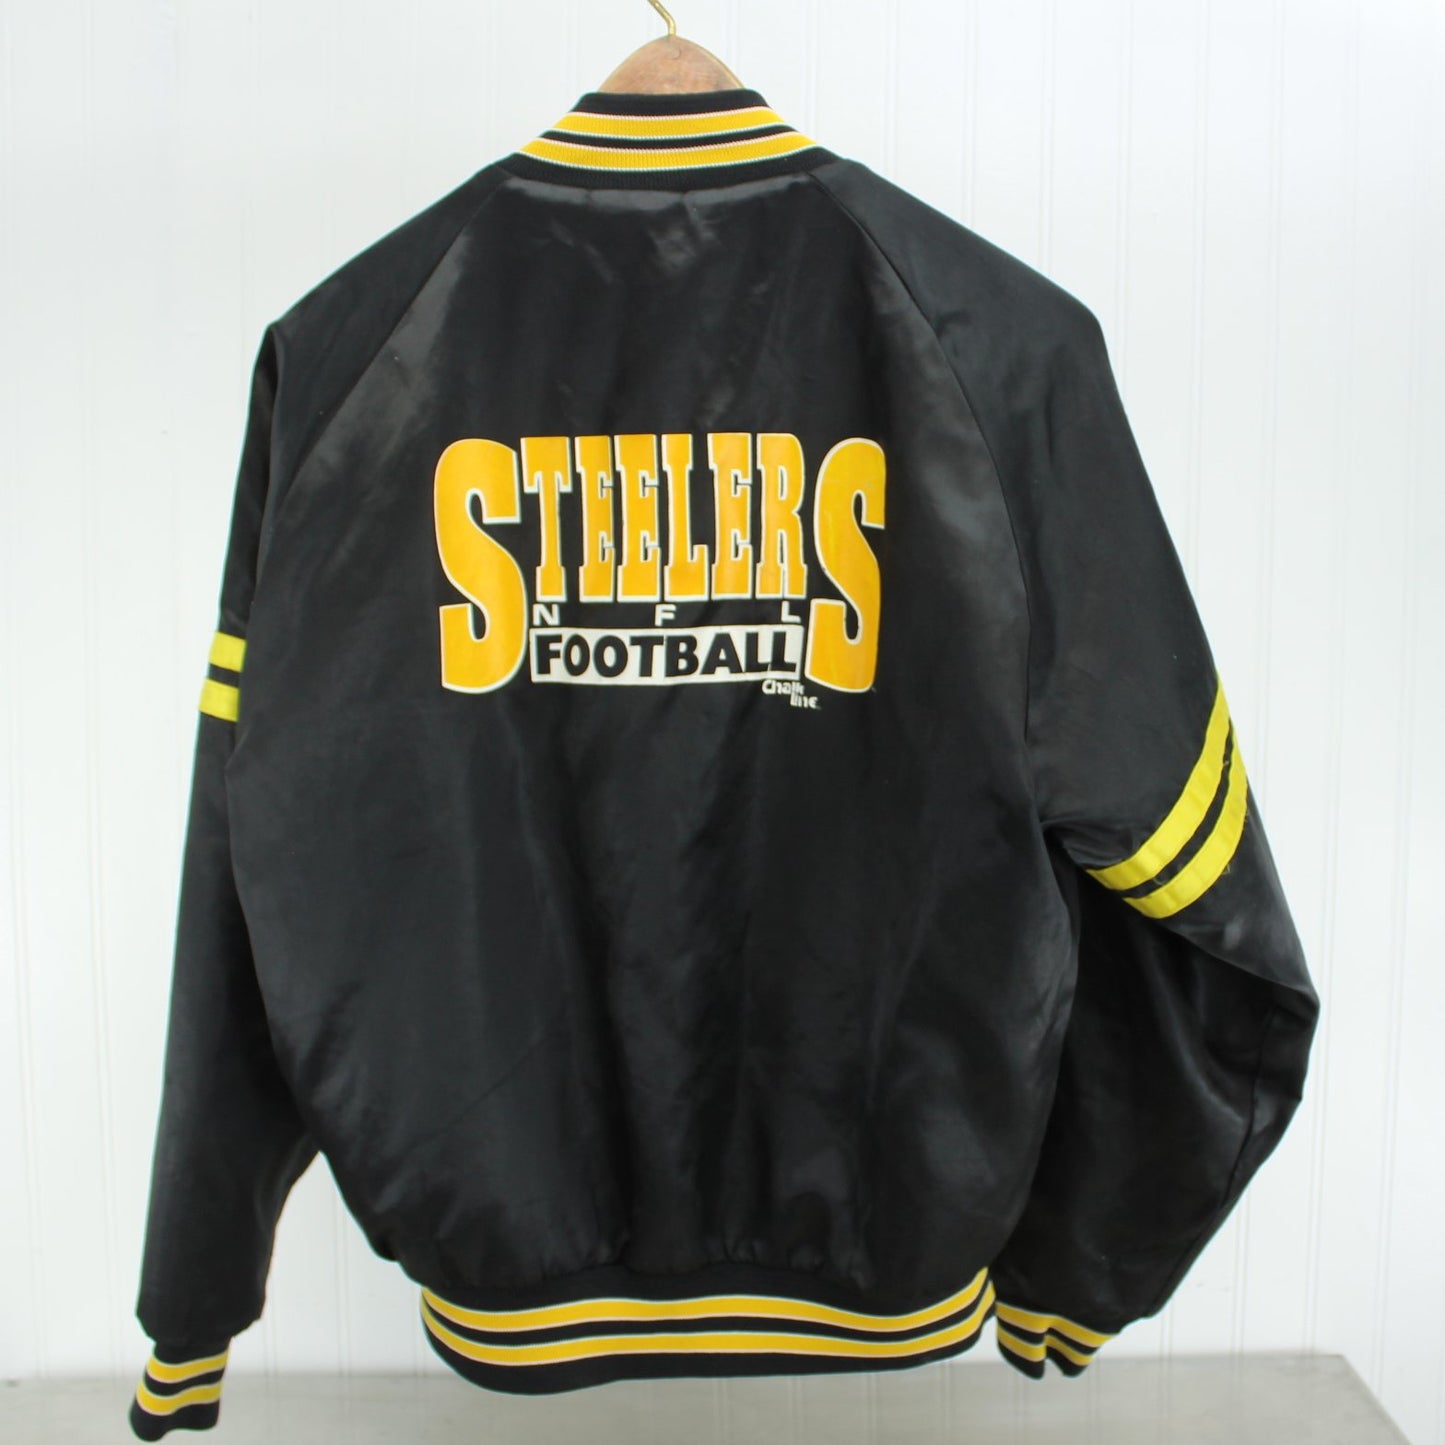 Steelers NFL Nylon Warm Up Jacket Size 18/20 Small Maker Chalk Line USA Collectible back of jacket